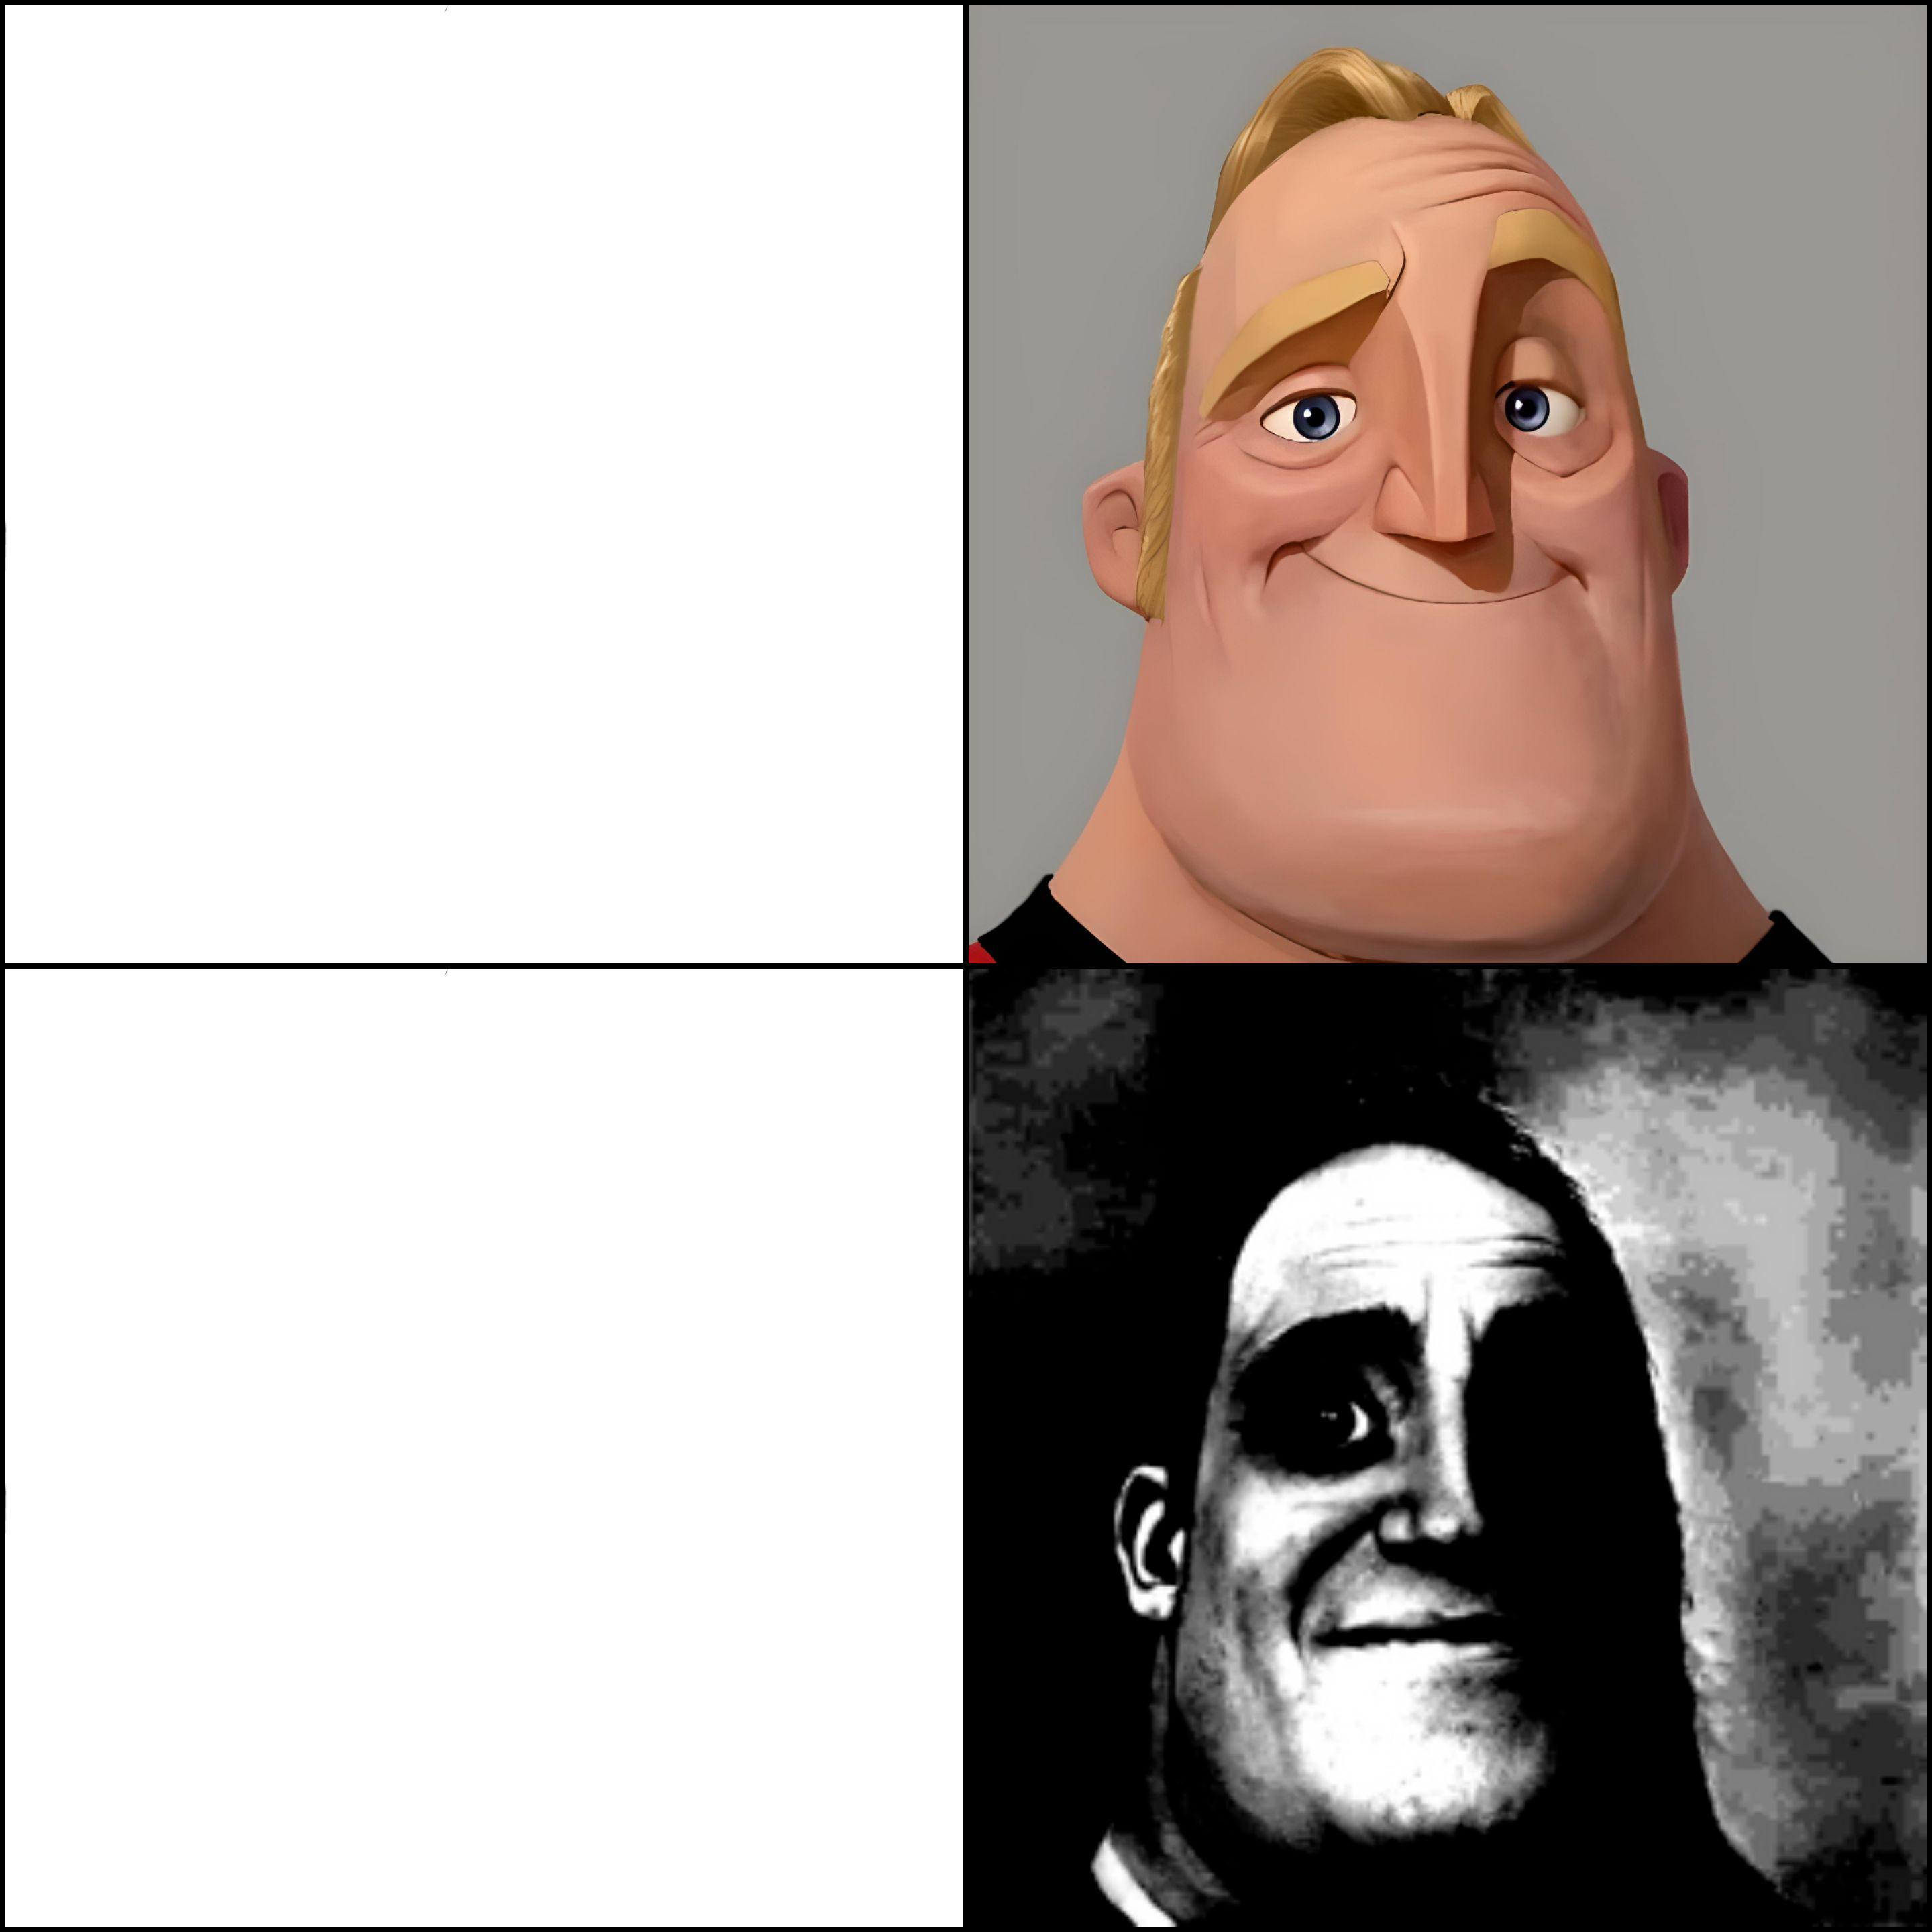 Mr Incredible Becoming Uncanny Meme Template Generator: Free Download and Add Caption